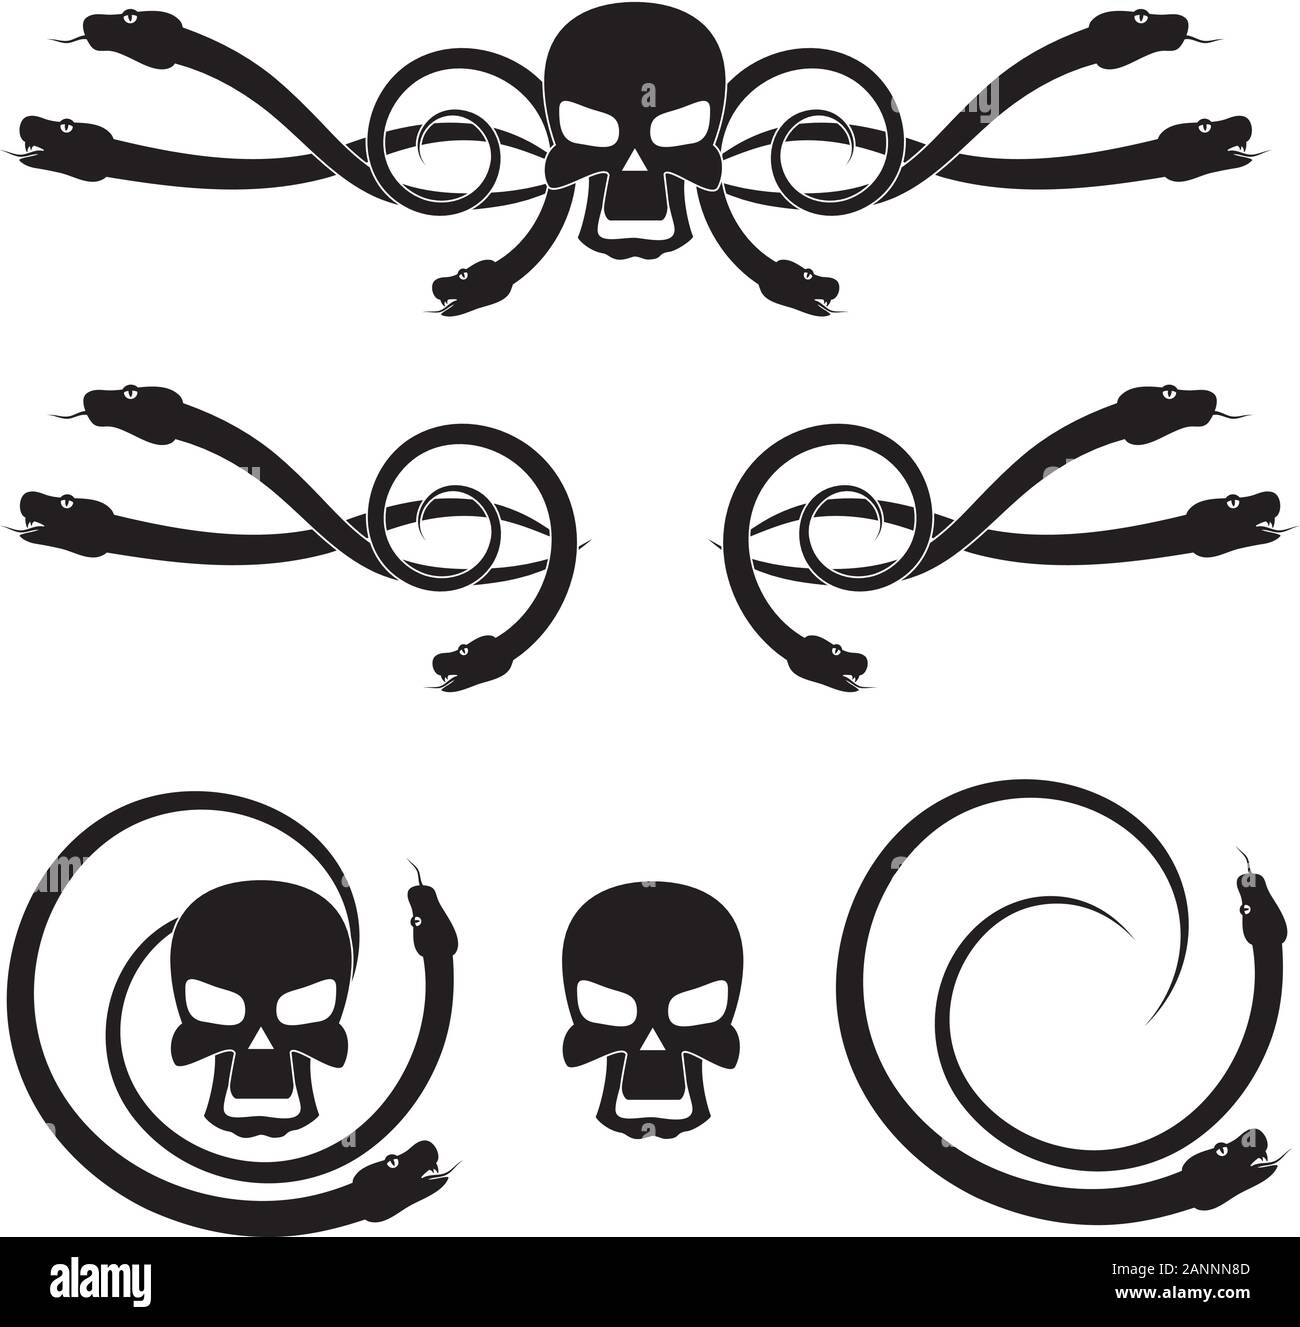 Abstract cartoon skull with snakes in black and white. Stock Vector